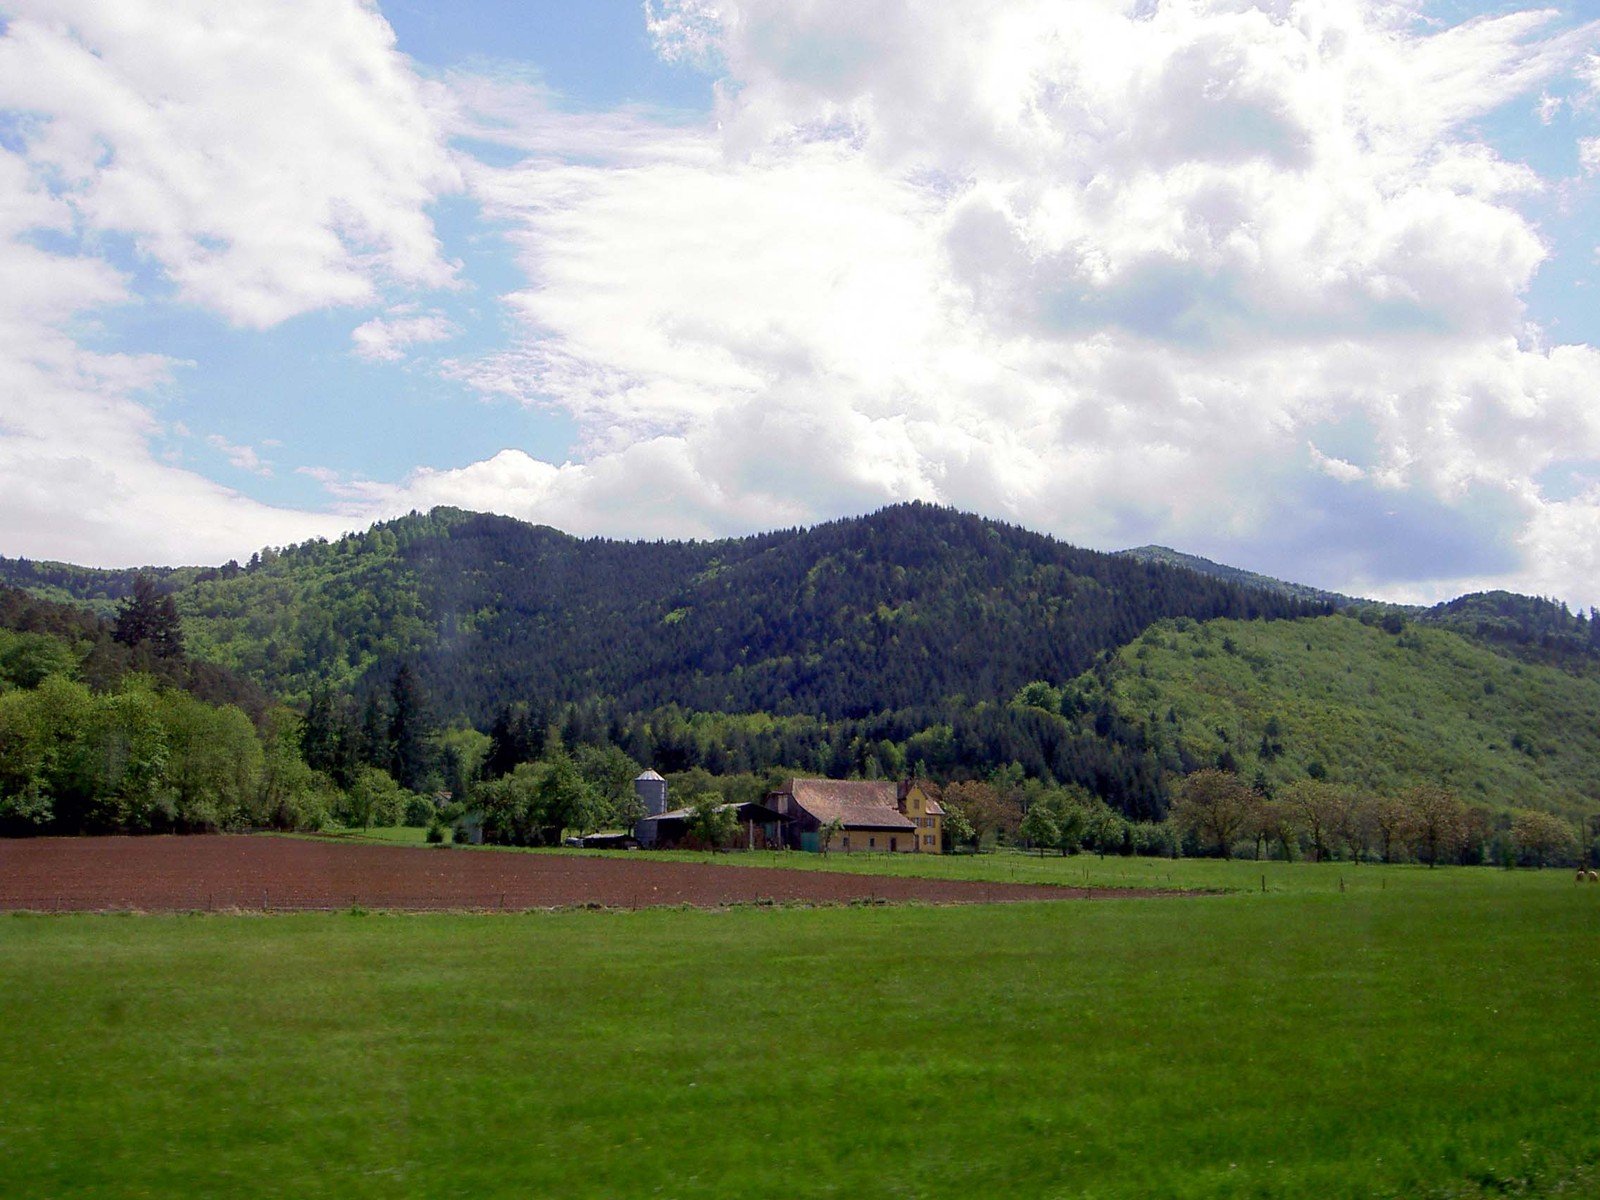 a farm is in the foreground and a distant hill in the distance